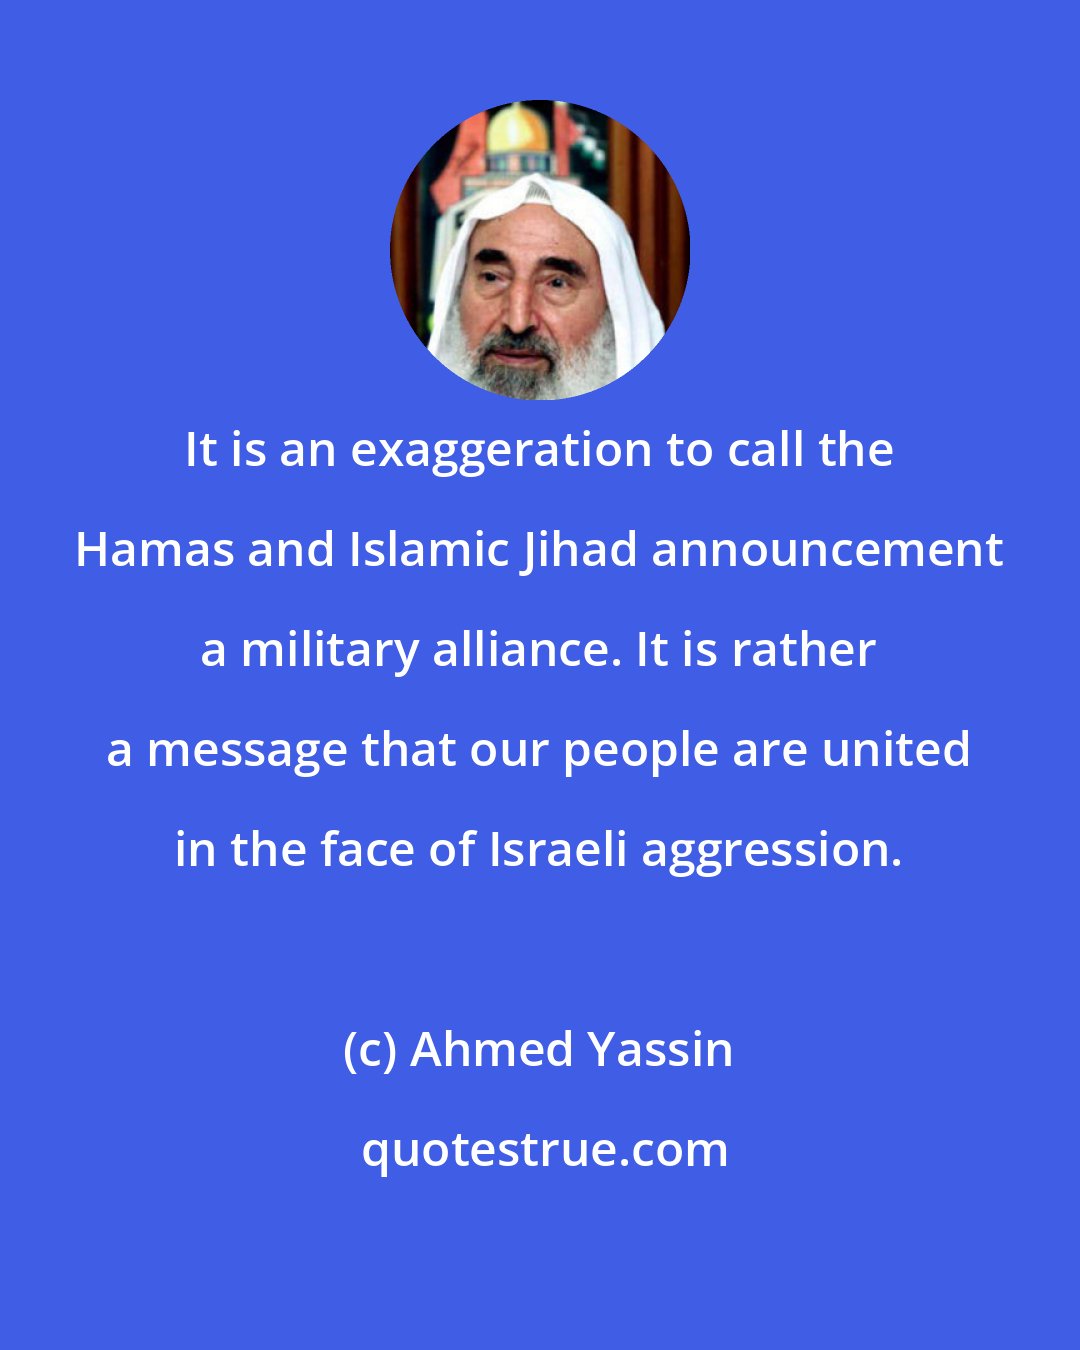 Ahmed Yassin: It is an exaggeration to call the Hamas and Islamic Jihad announcement a military alliance. It is rather a message that our people are united in the face of Israeli aggression.